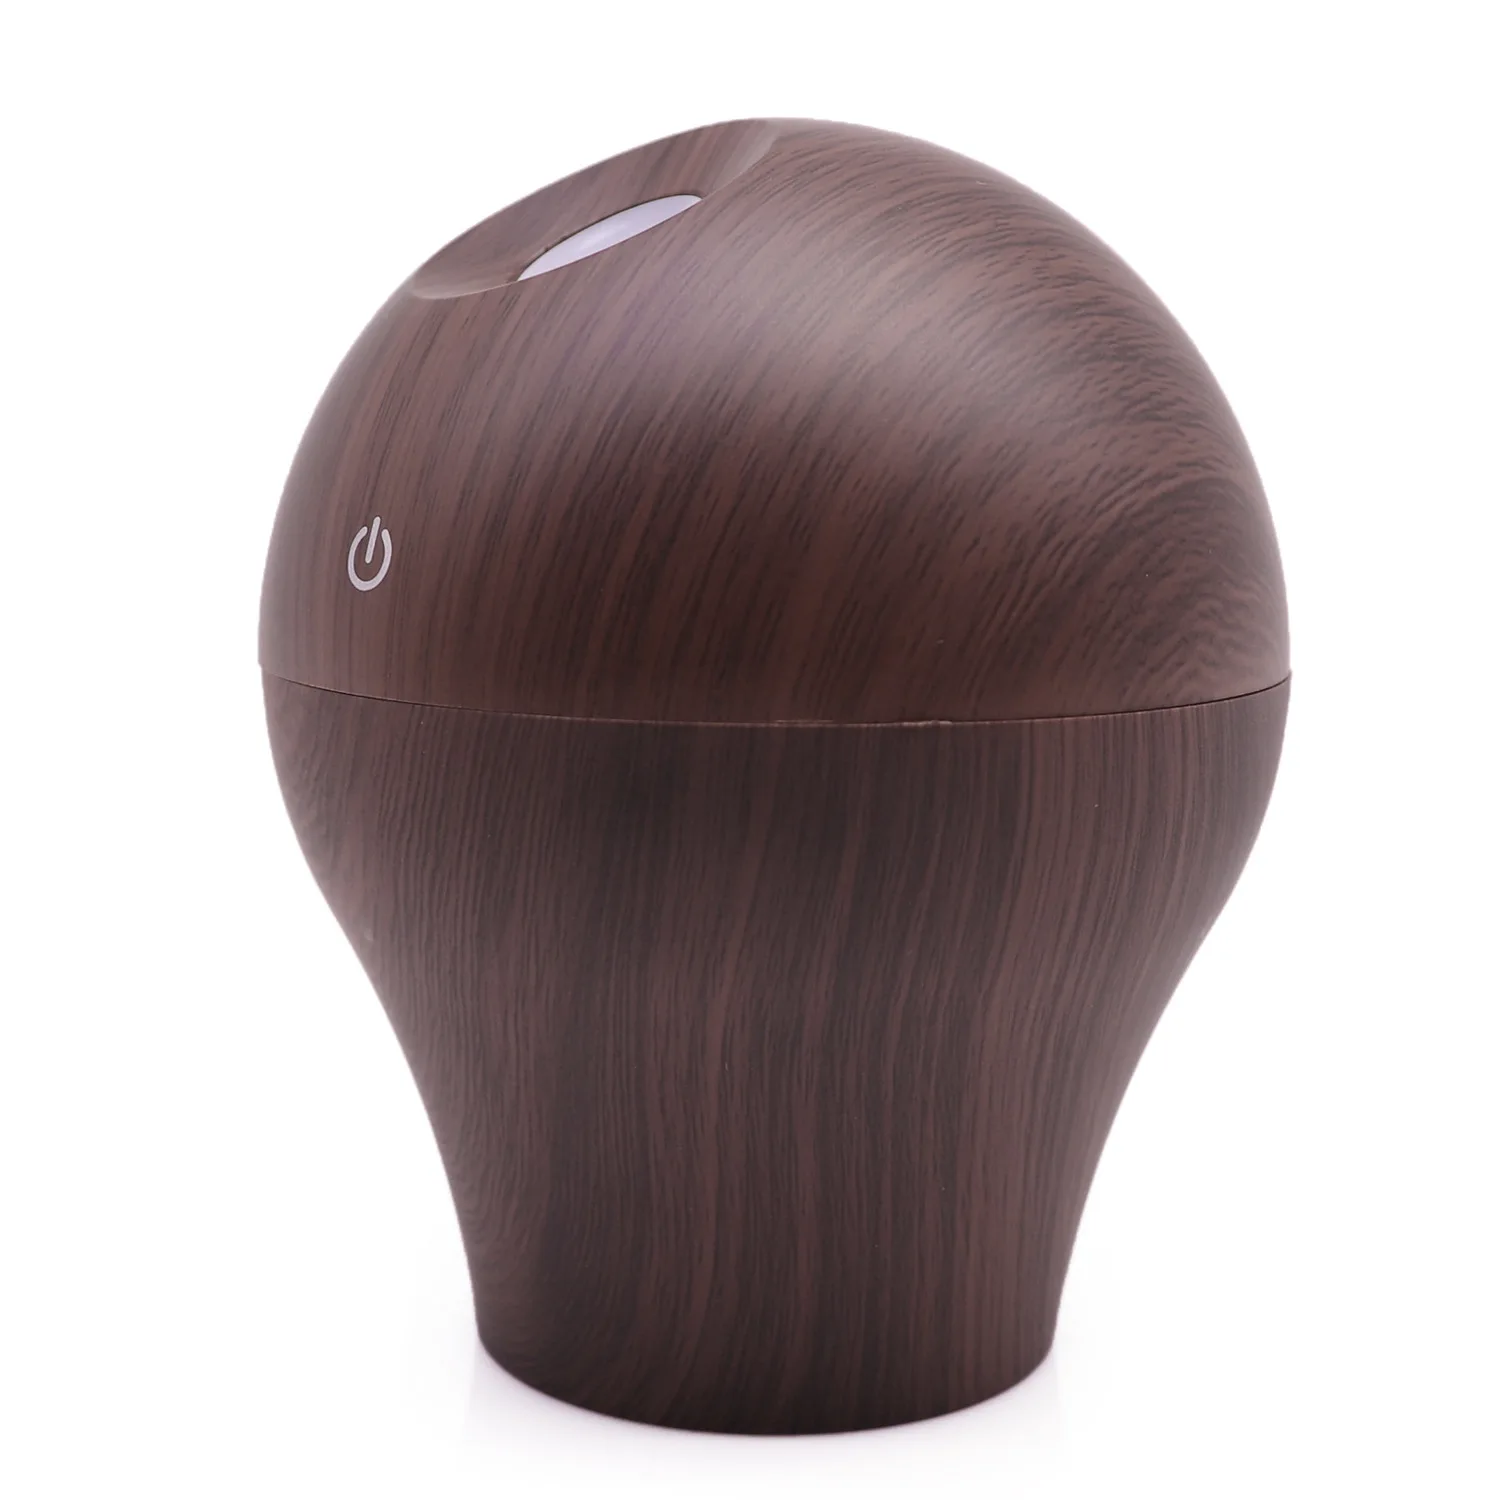 Mini Ultrasonic Air Humidifier USB Aroma Diffuser Wood Grain LED Night Light Electric Essential Oil Purifier Mist | Дом и сад